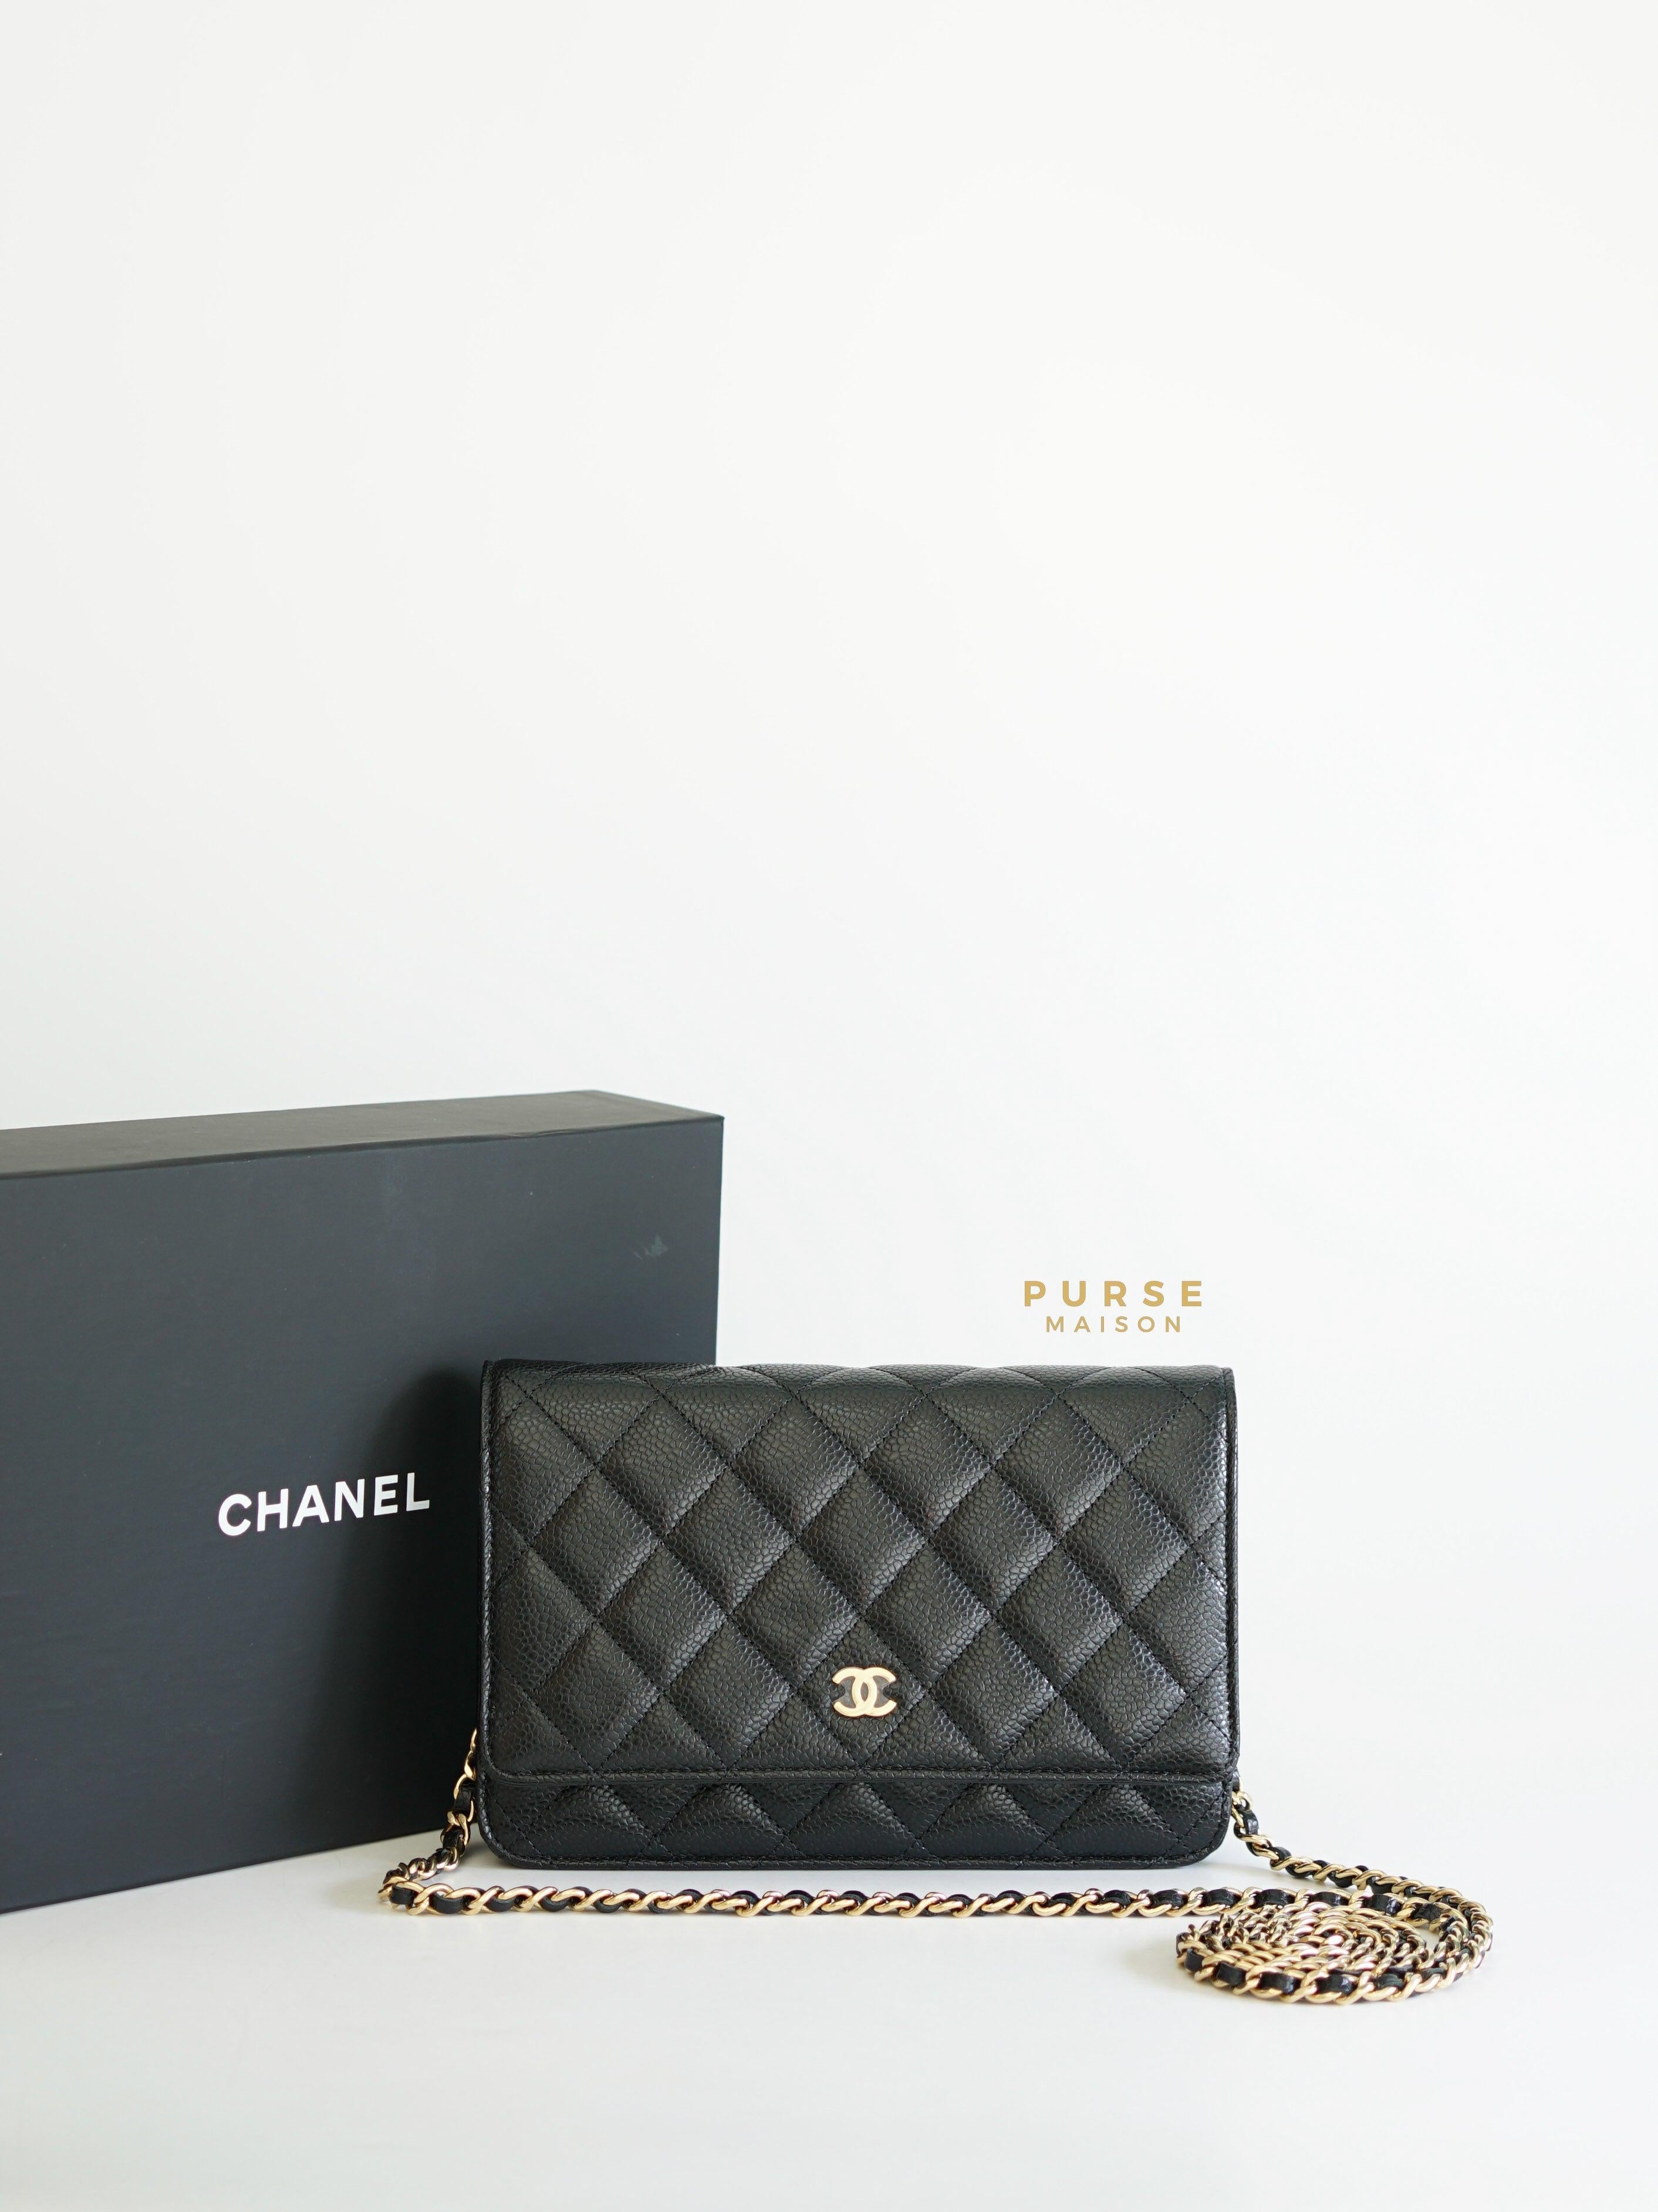 Chanel Wallet on Chain in Black Caviar and Light Gold Hardware (Microchip) | Purse Maison Luxury Bags Shop